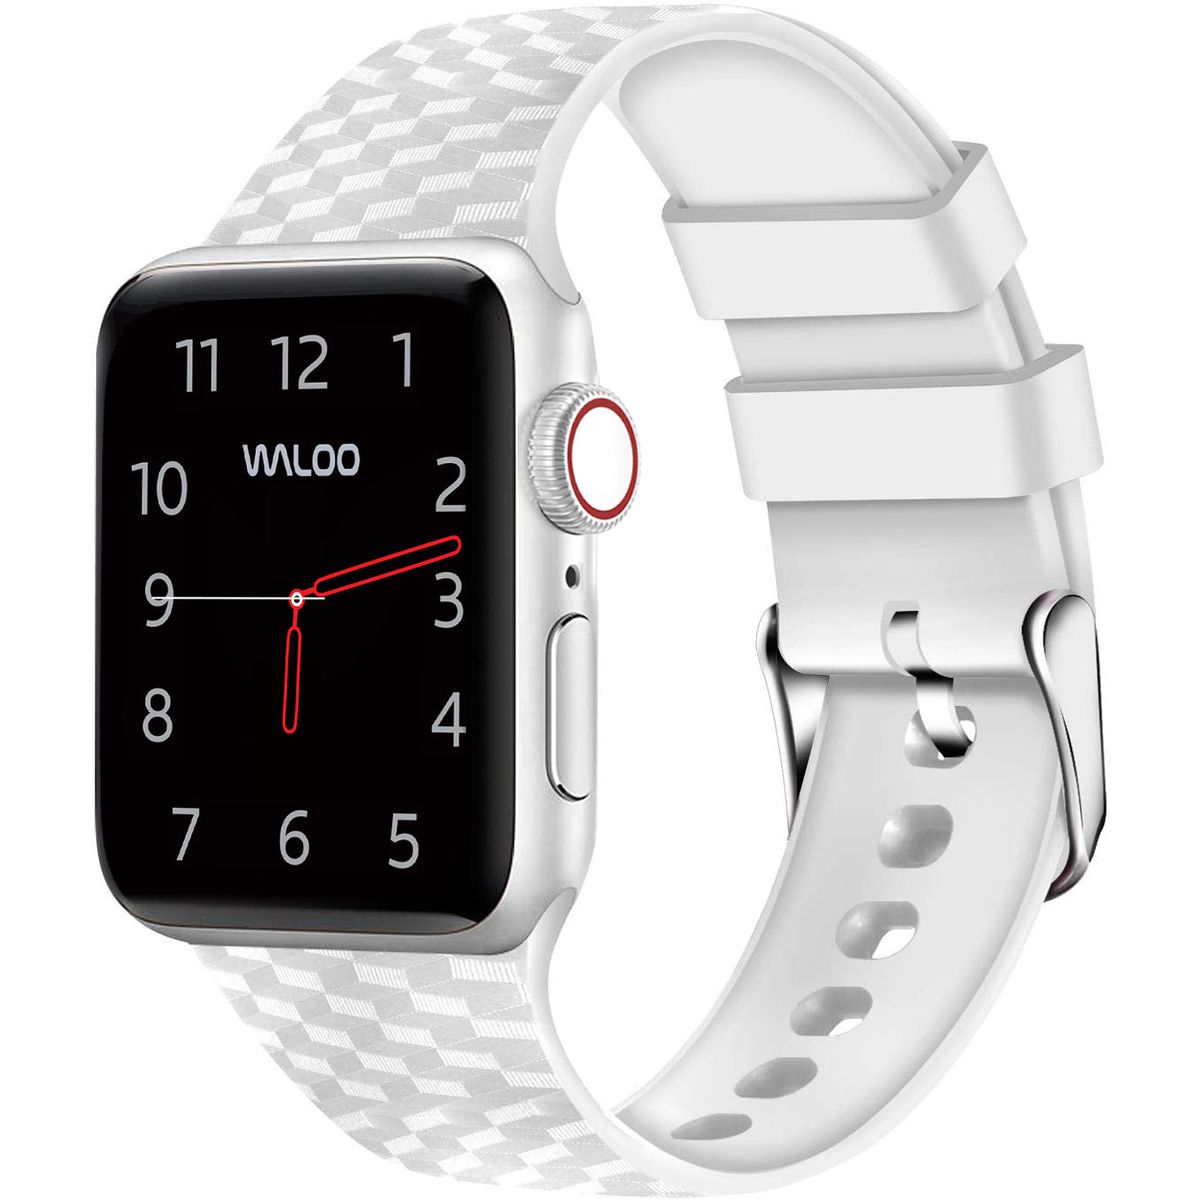 Photos - Watch Strap Waloo Products Carbon Fiber Silicone Band for Apple Watch Series 1-9 - 38/